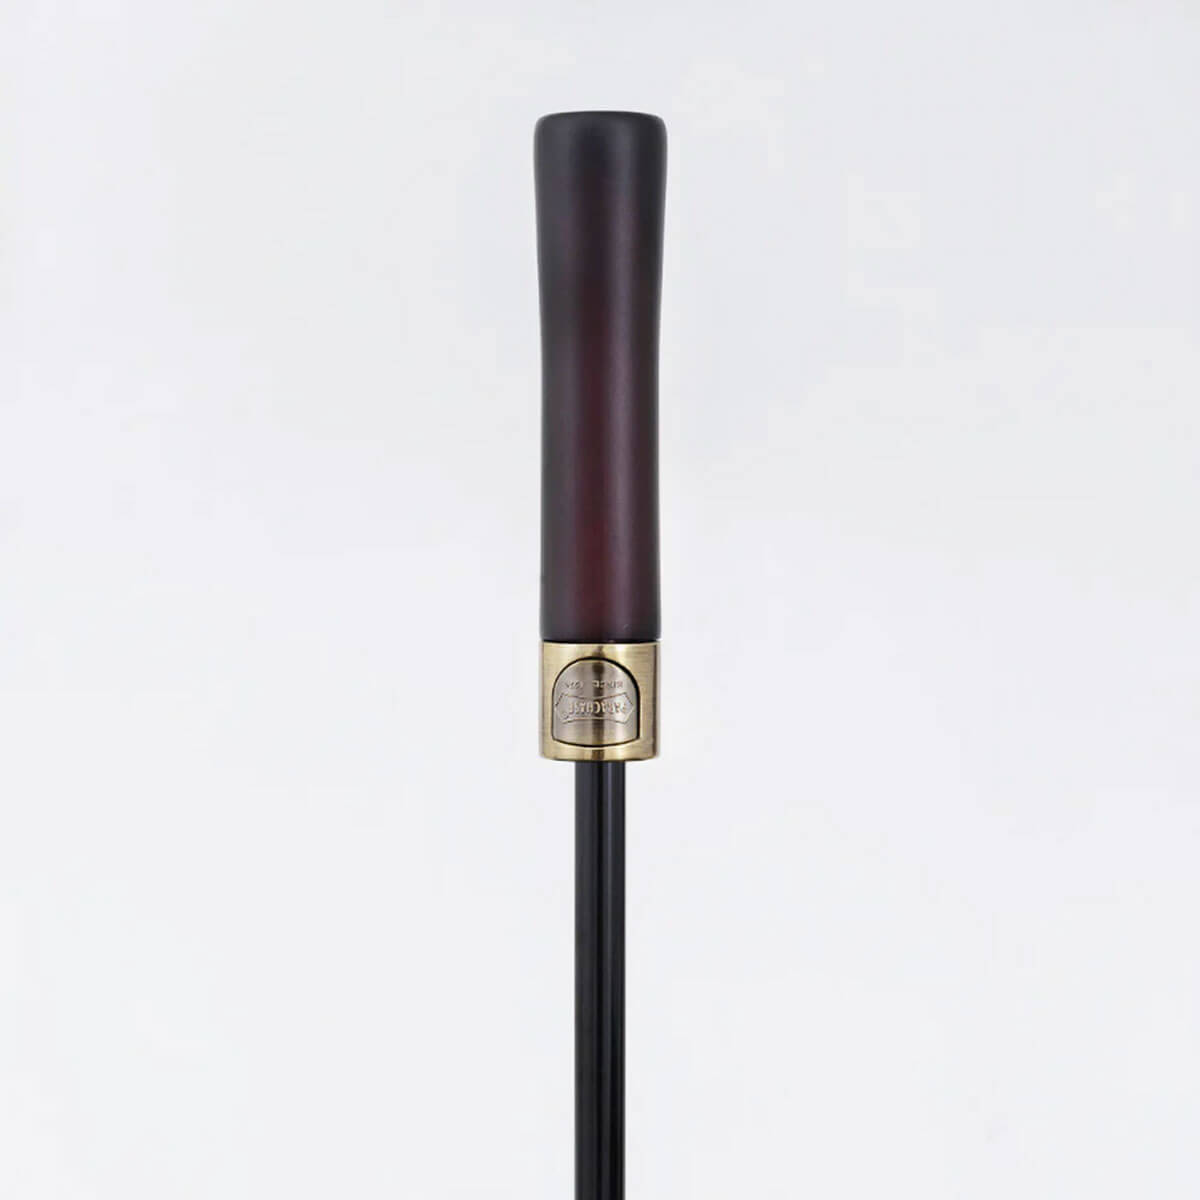 Luxurious vintage design with a wooden handle